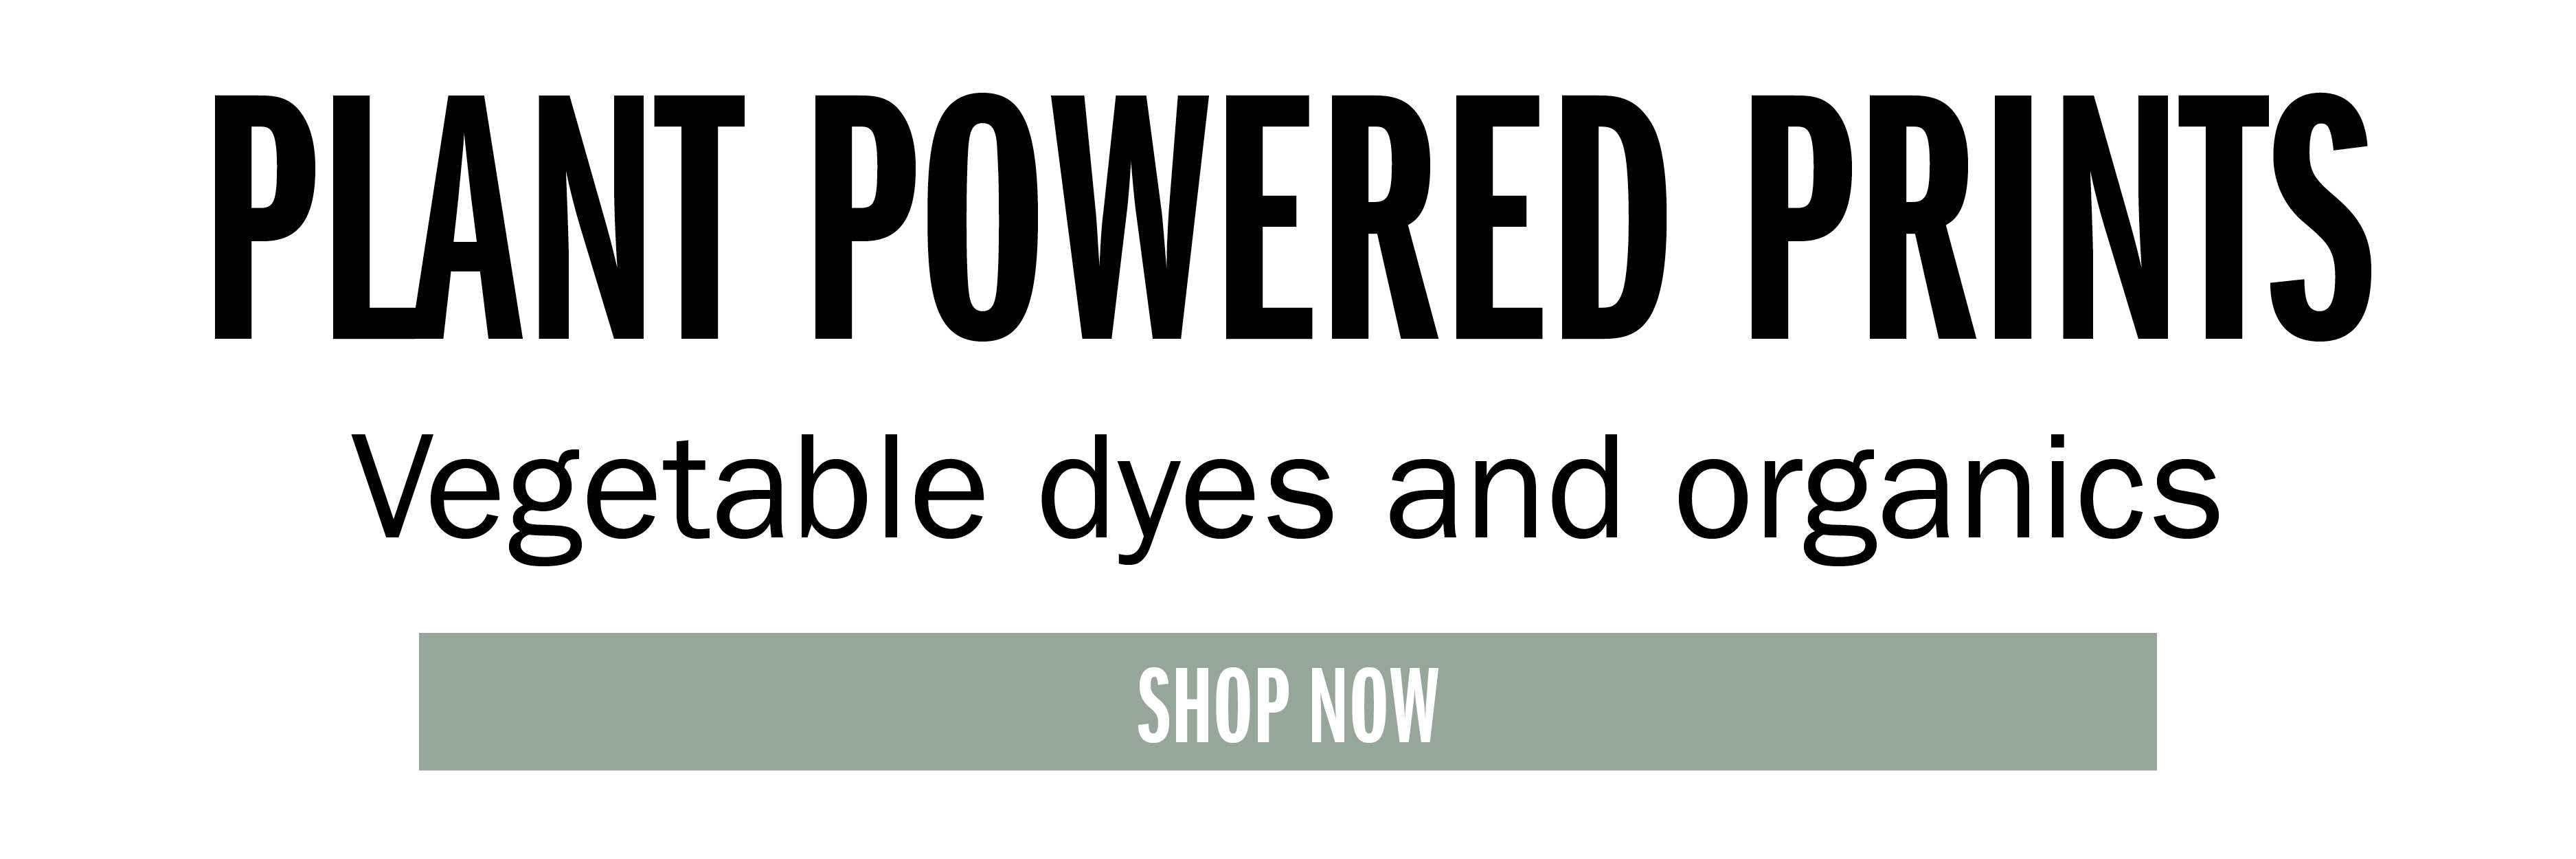 PLANT POWERED PRINTS Vegetable dyes and organics SHOP NOW